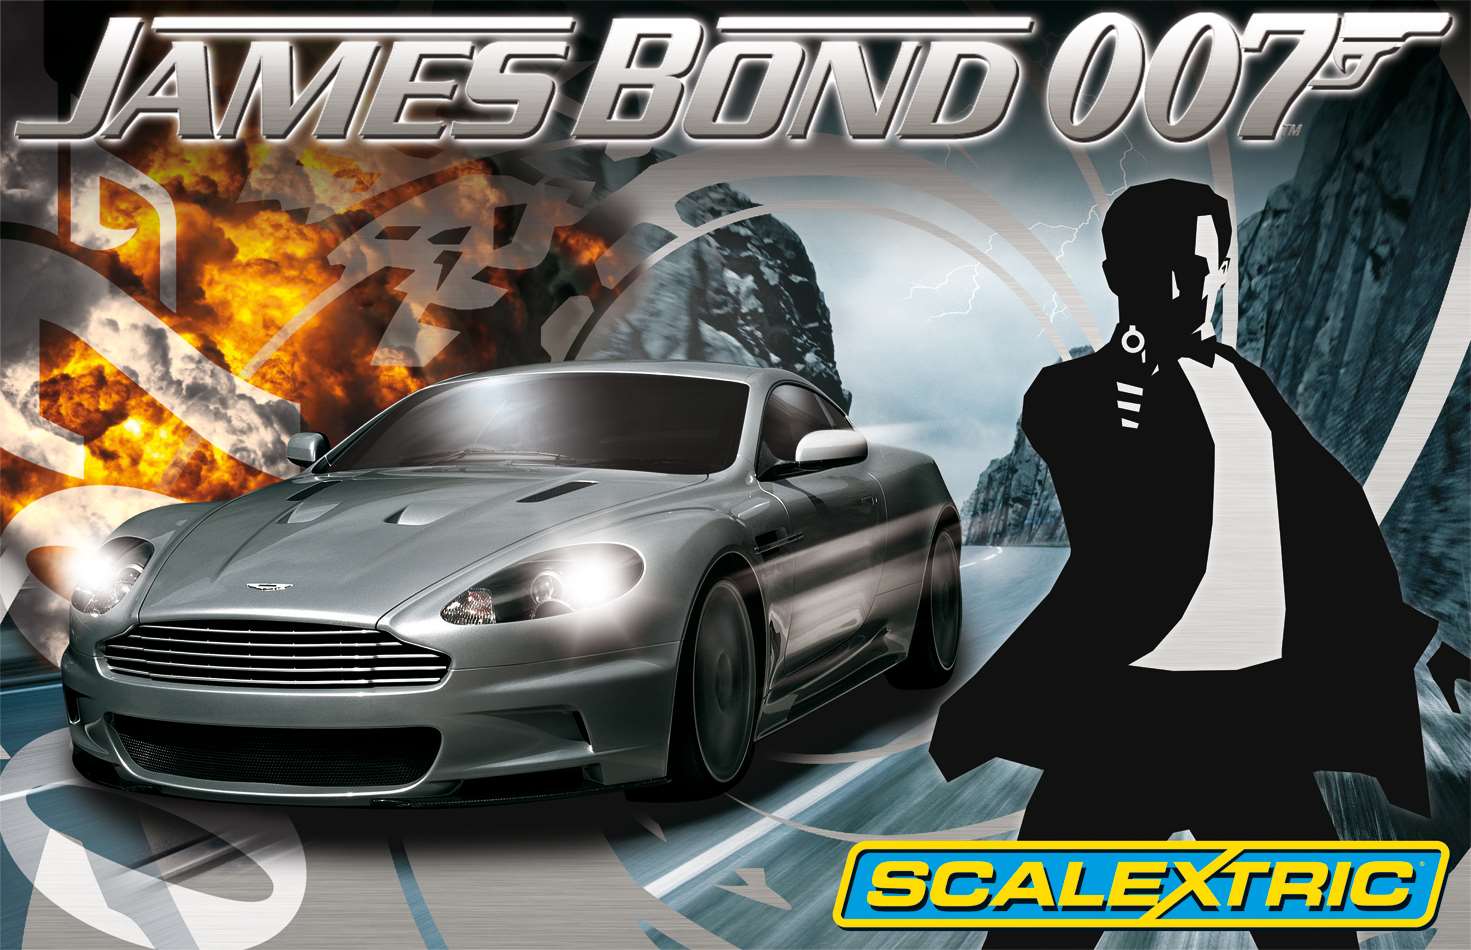 Hornby has a long-running association with making James Bond-themed toys